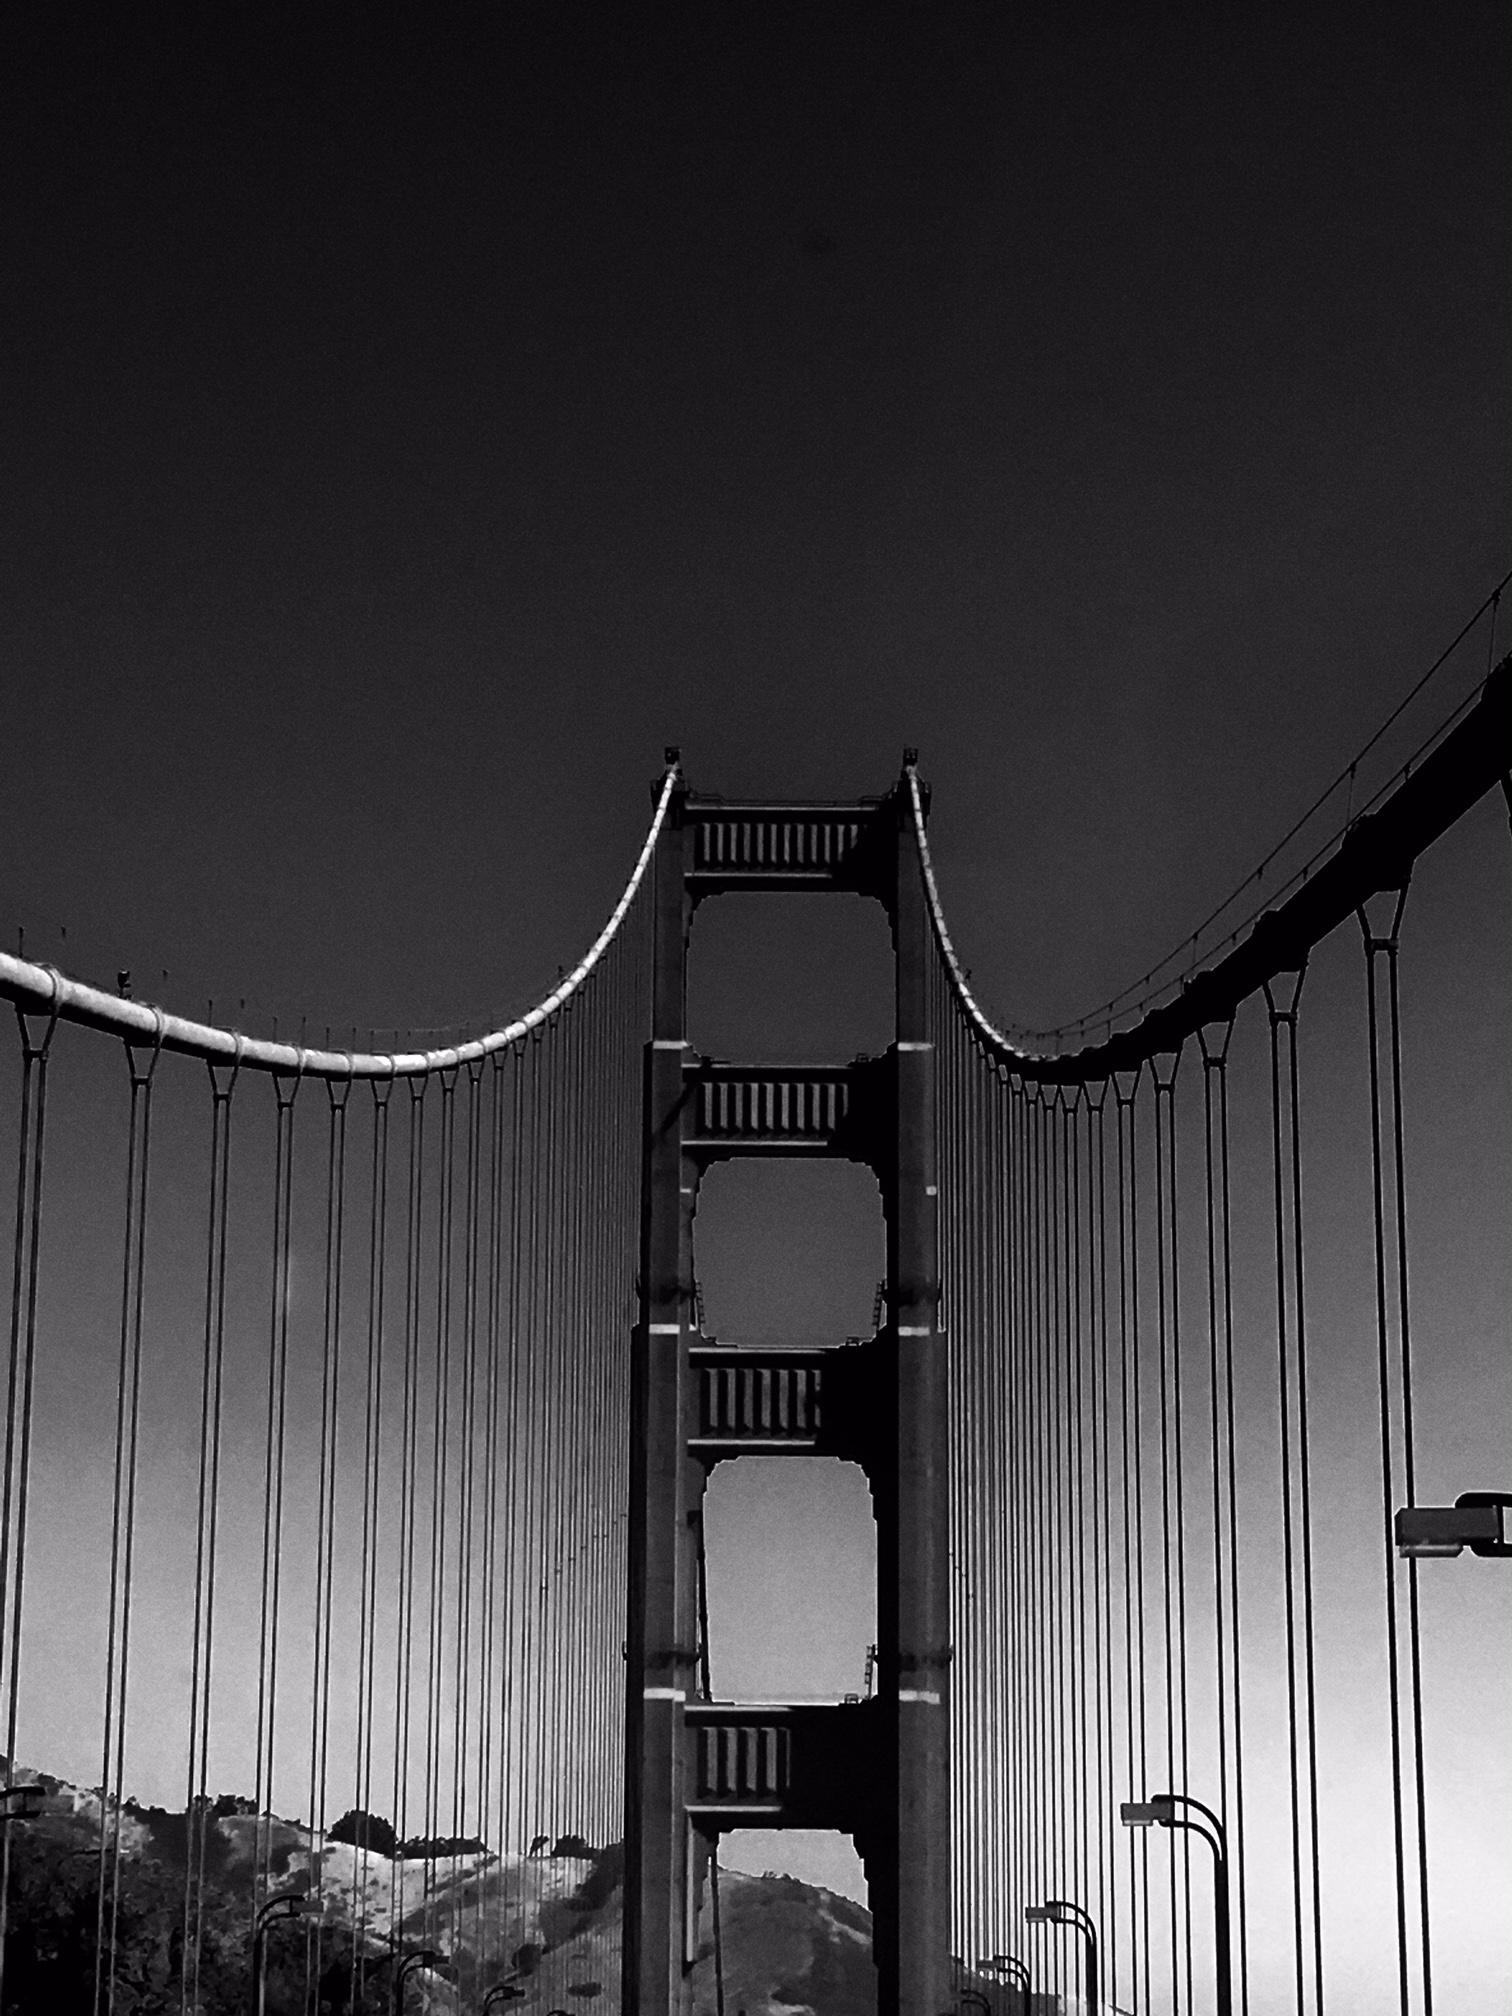 #InTheSky San Francisco #41 - Black Black and White Photograph by James Bacchi